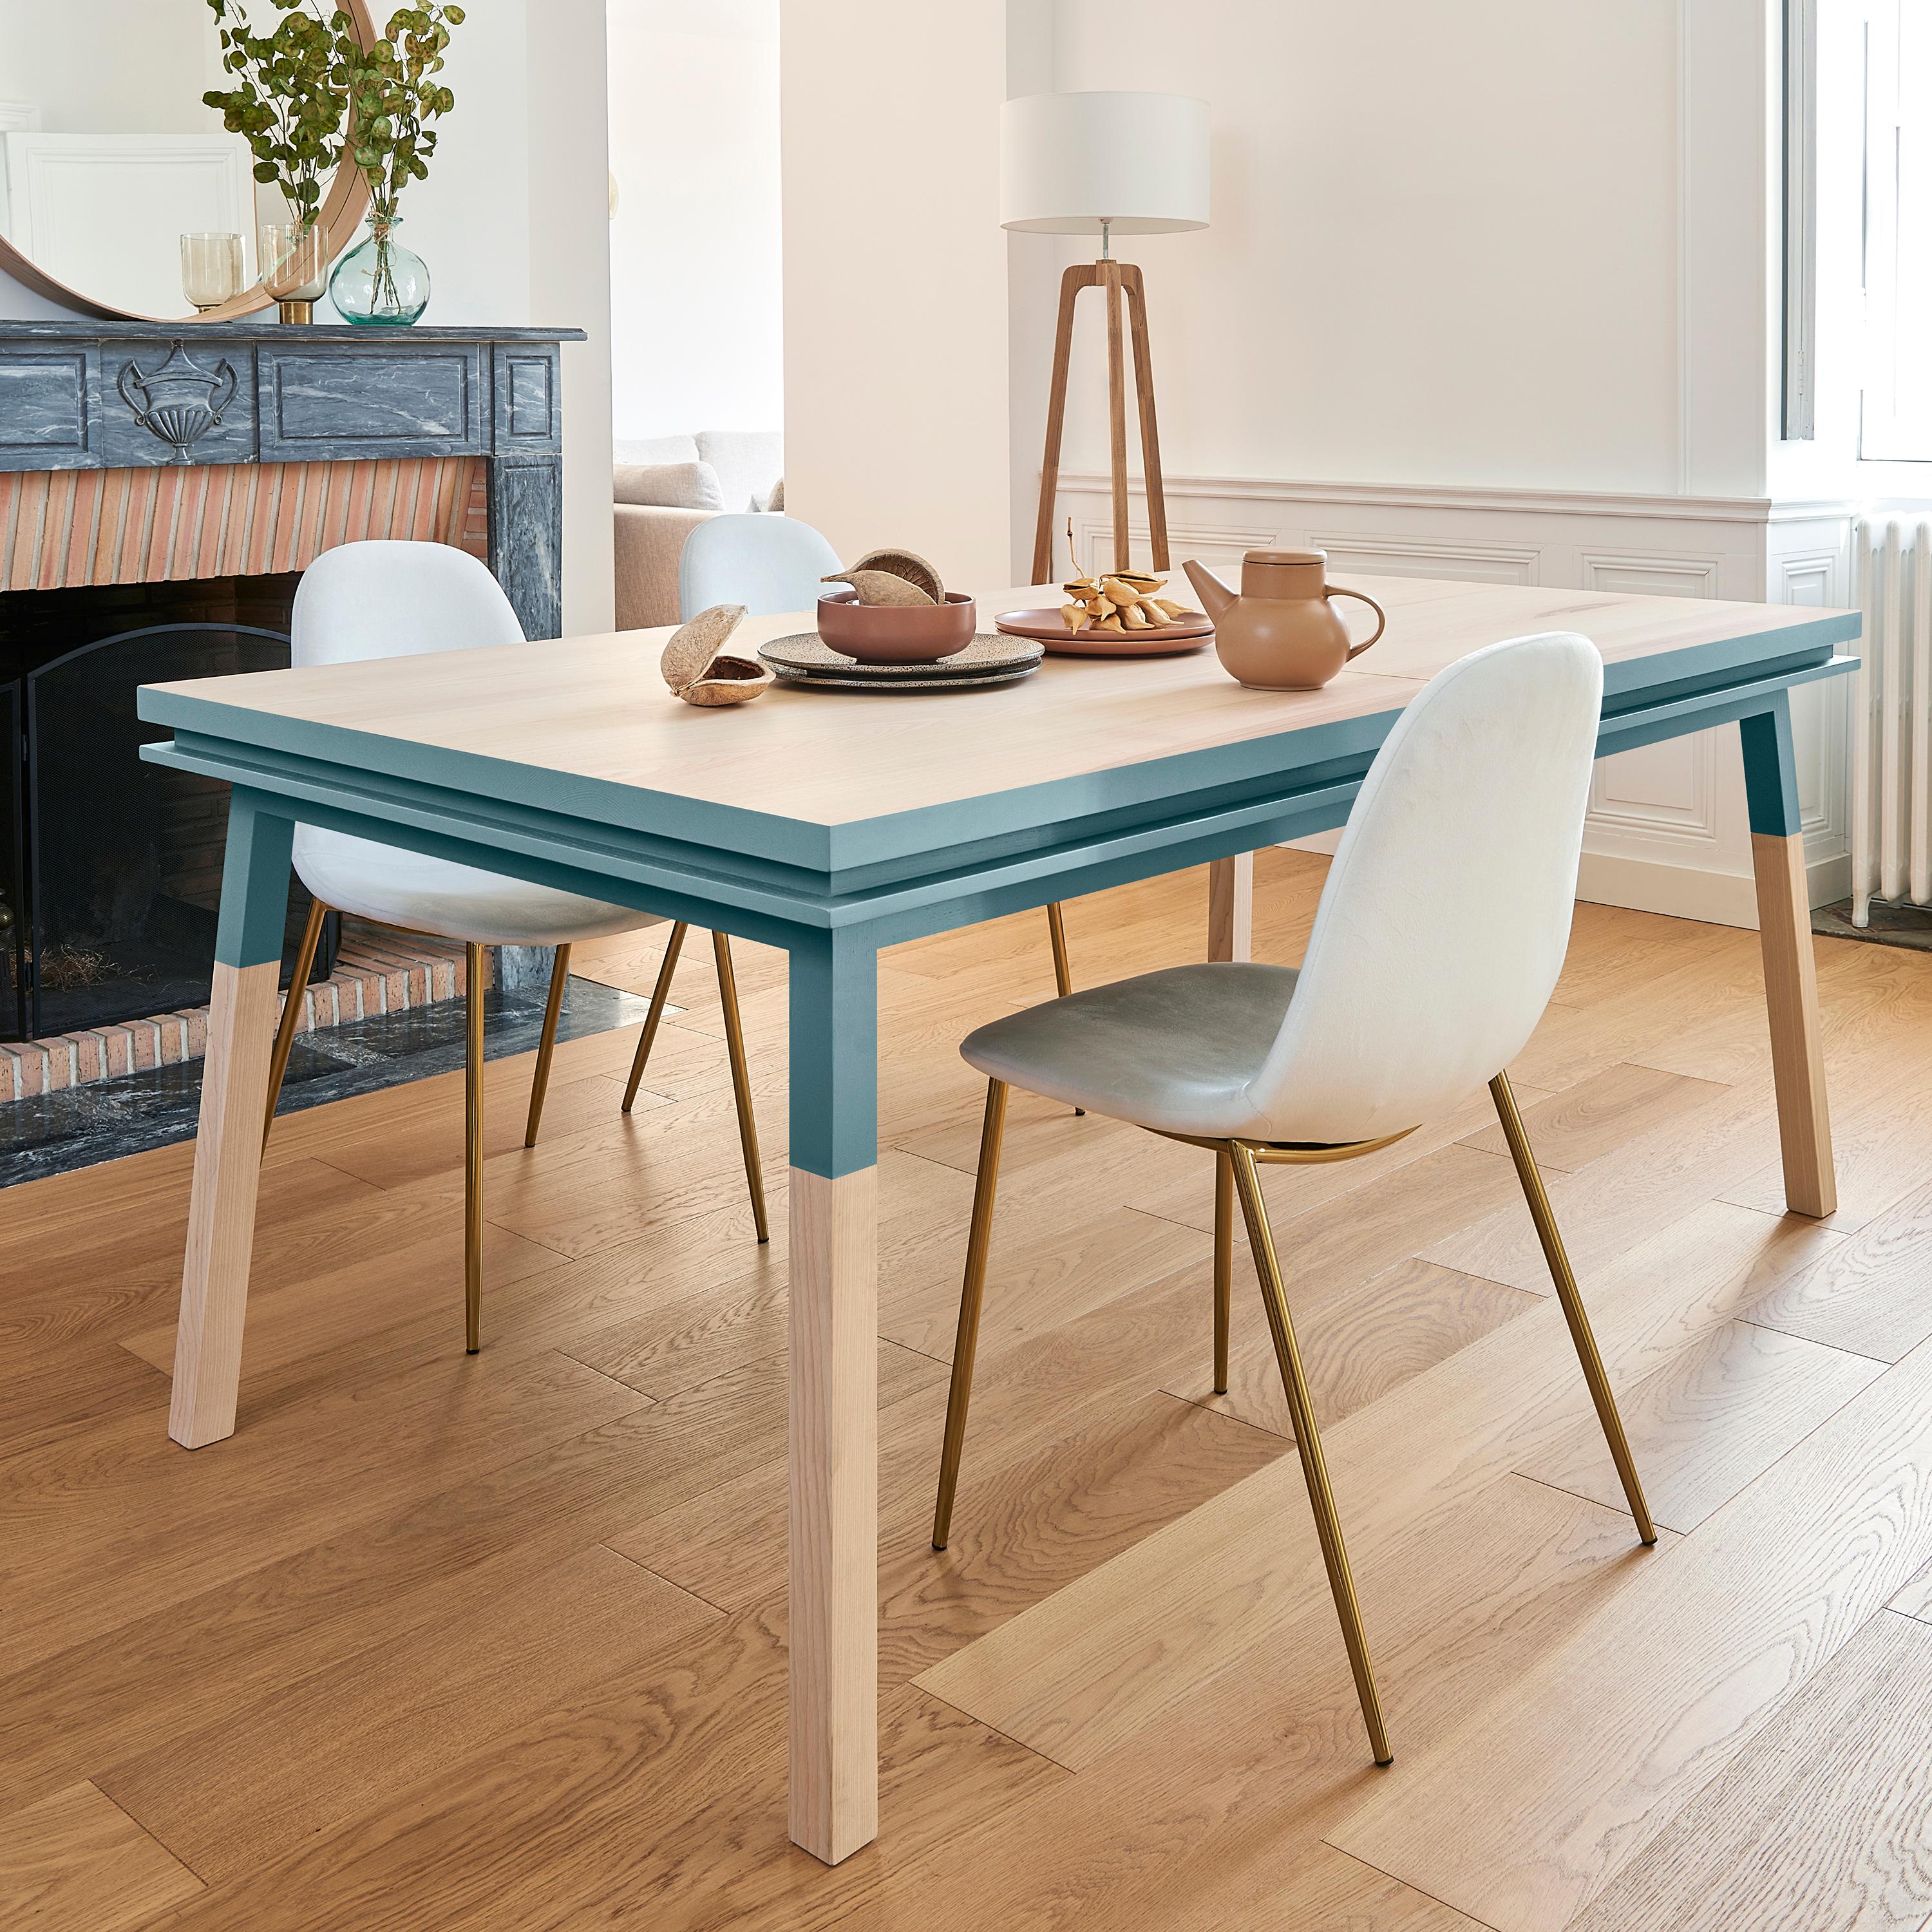 This rectangular dining table is proposed with 2 integrated and foldex extensions. 

It is made of 100% solid ash wood from sustainably managed and PEFC certified French forests.

The 3 lengths are 220 cm / 86.6 in when the table is closed, 260 cm /